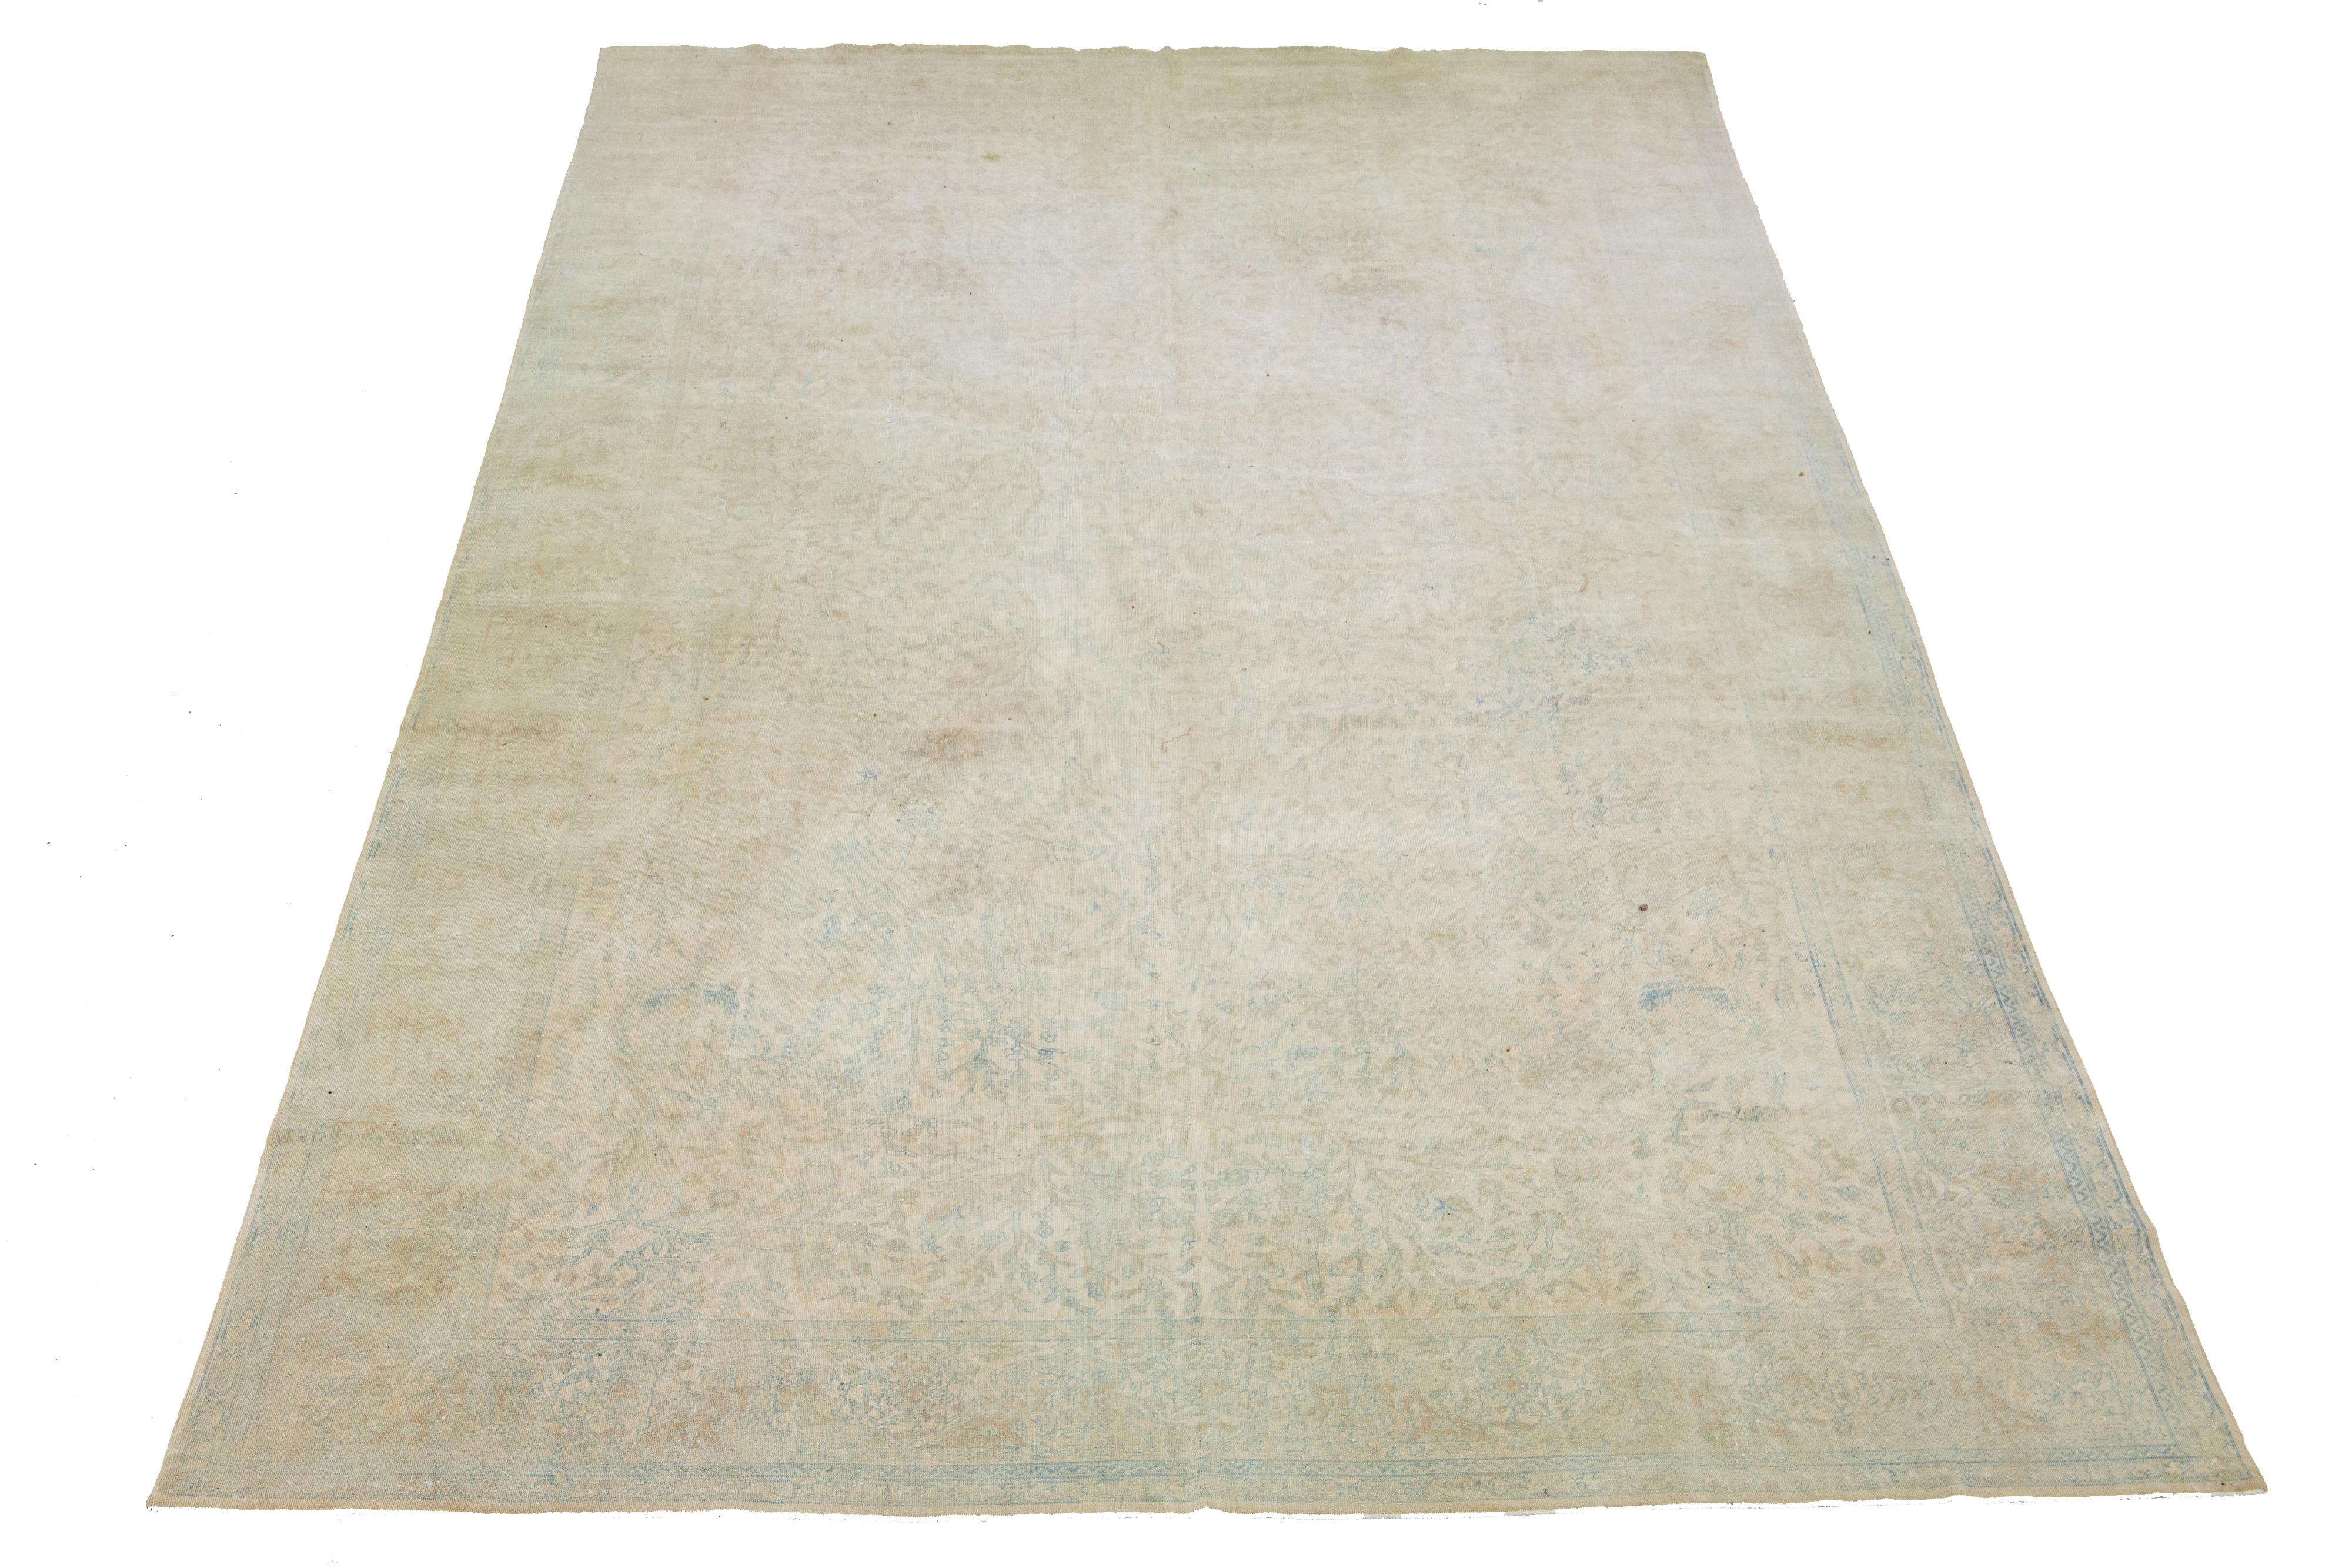 This beautiful hand-knotted, antique Agra wool rug has a tan-beige color field. The rug hails from India and features blue and brown accent colors in an all-over floral design.

This rug measures 10'9